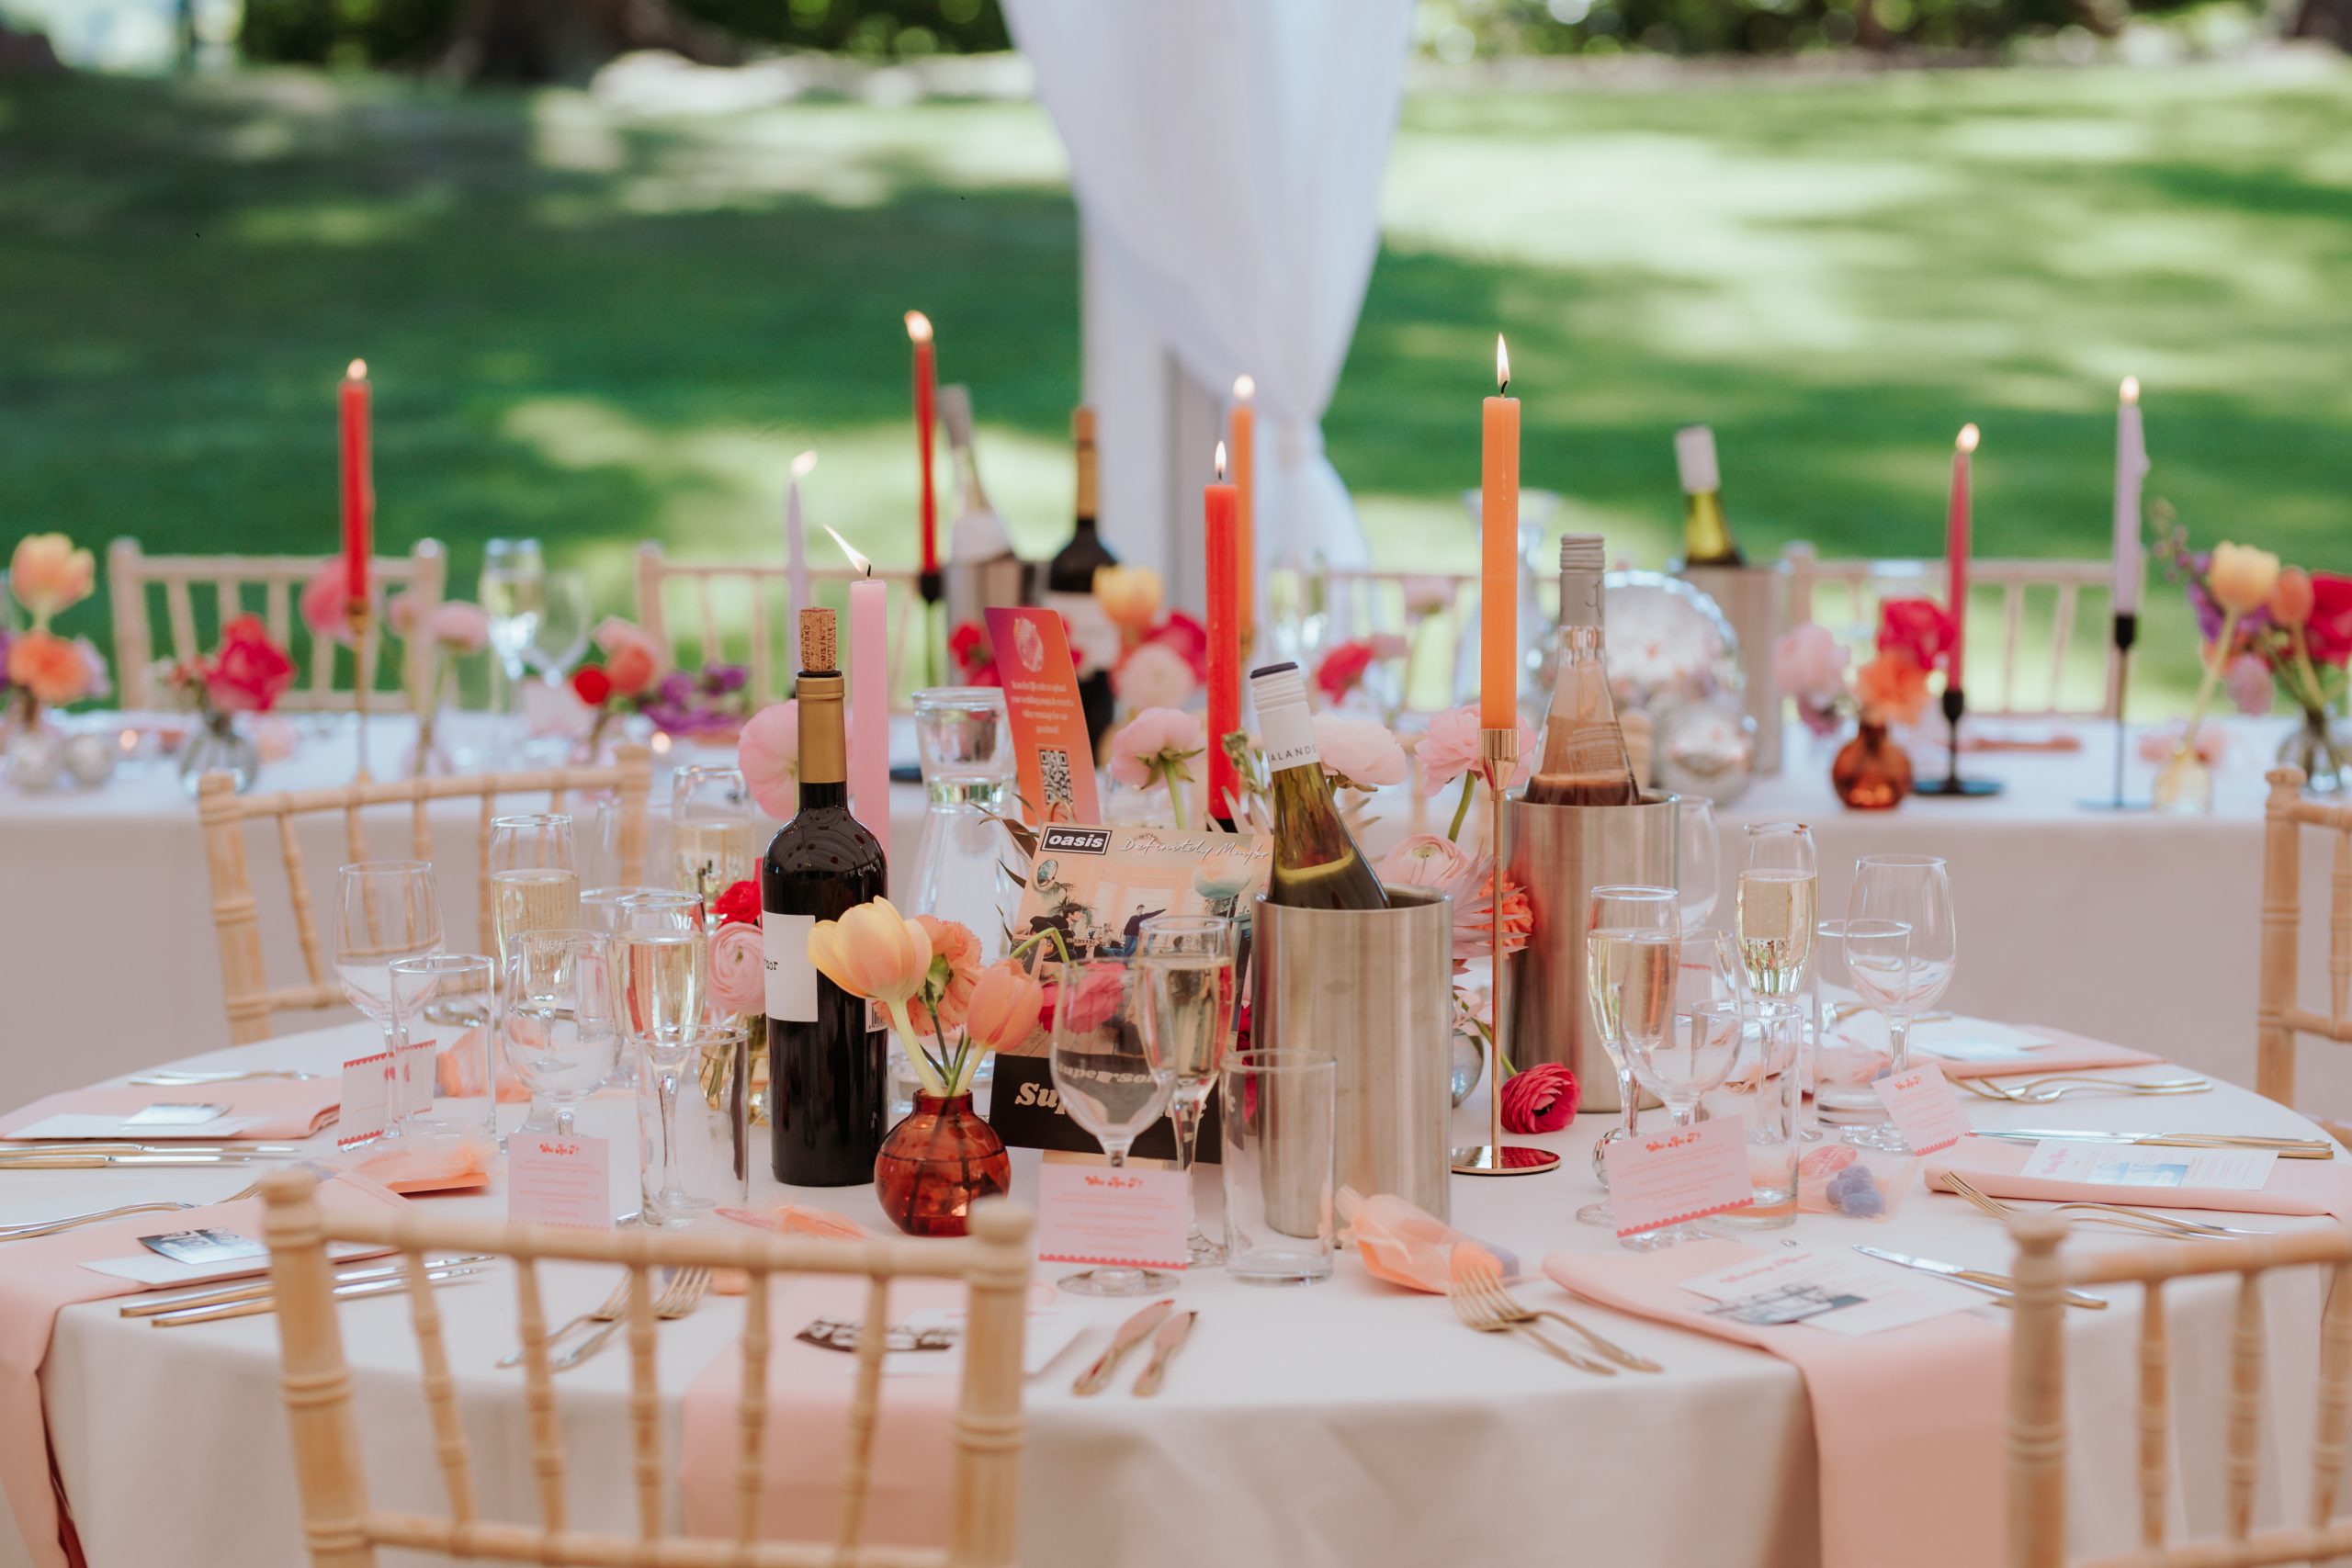 A colourful table setting filled with pink, orange and red candles and flowers